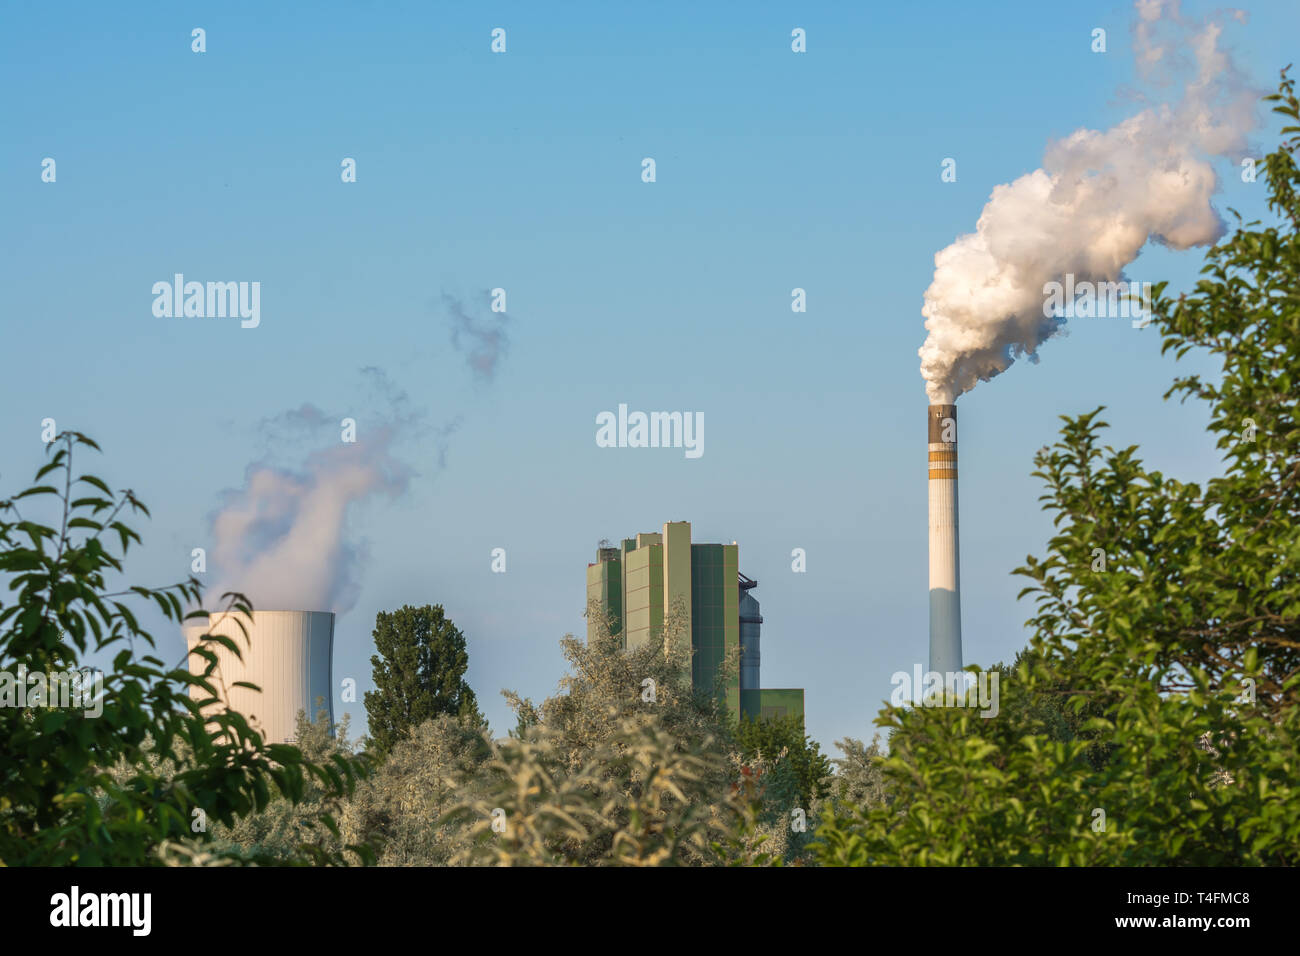 Nature under the influence of nearby power plant with heavily smoky chimney Stock Photo